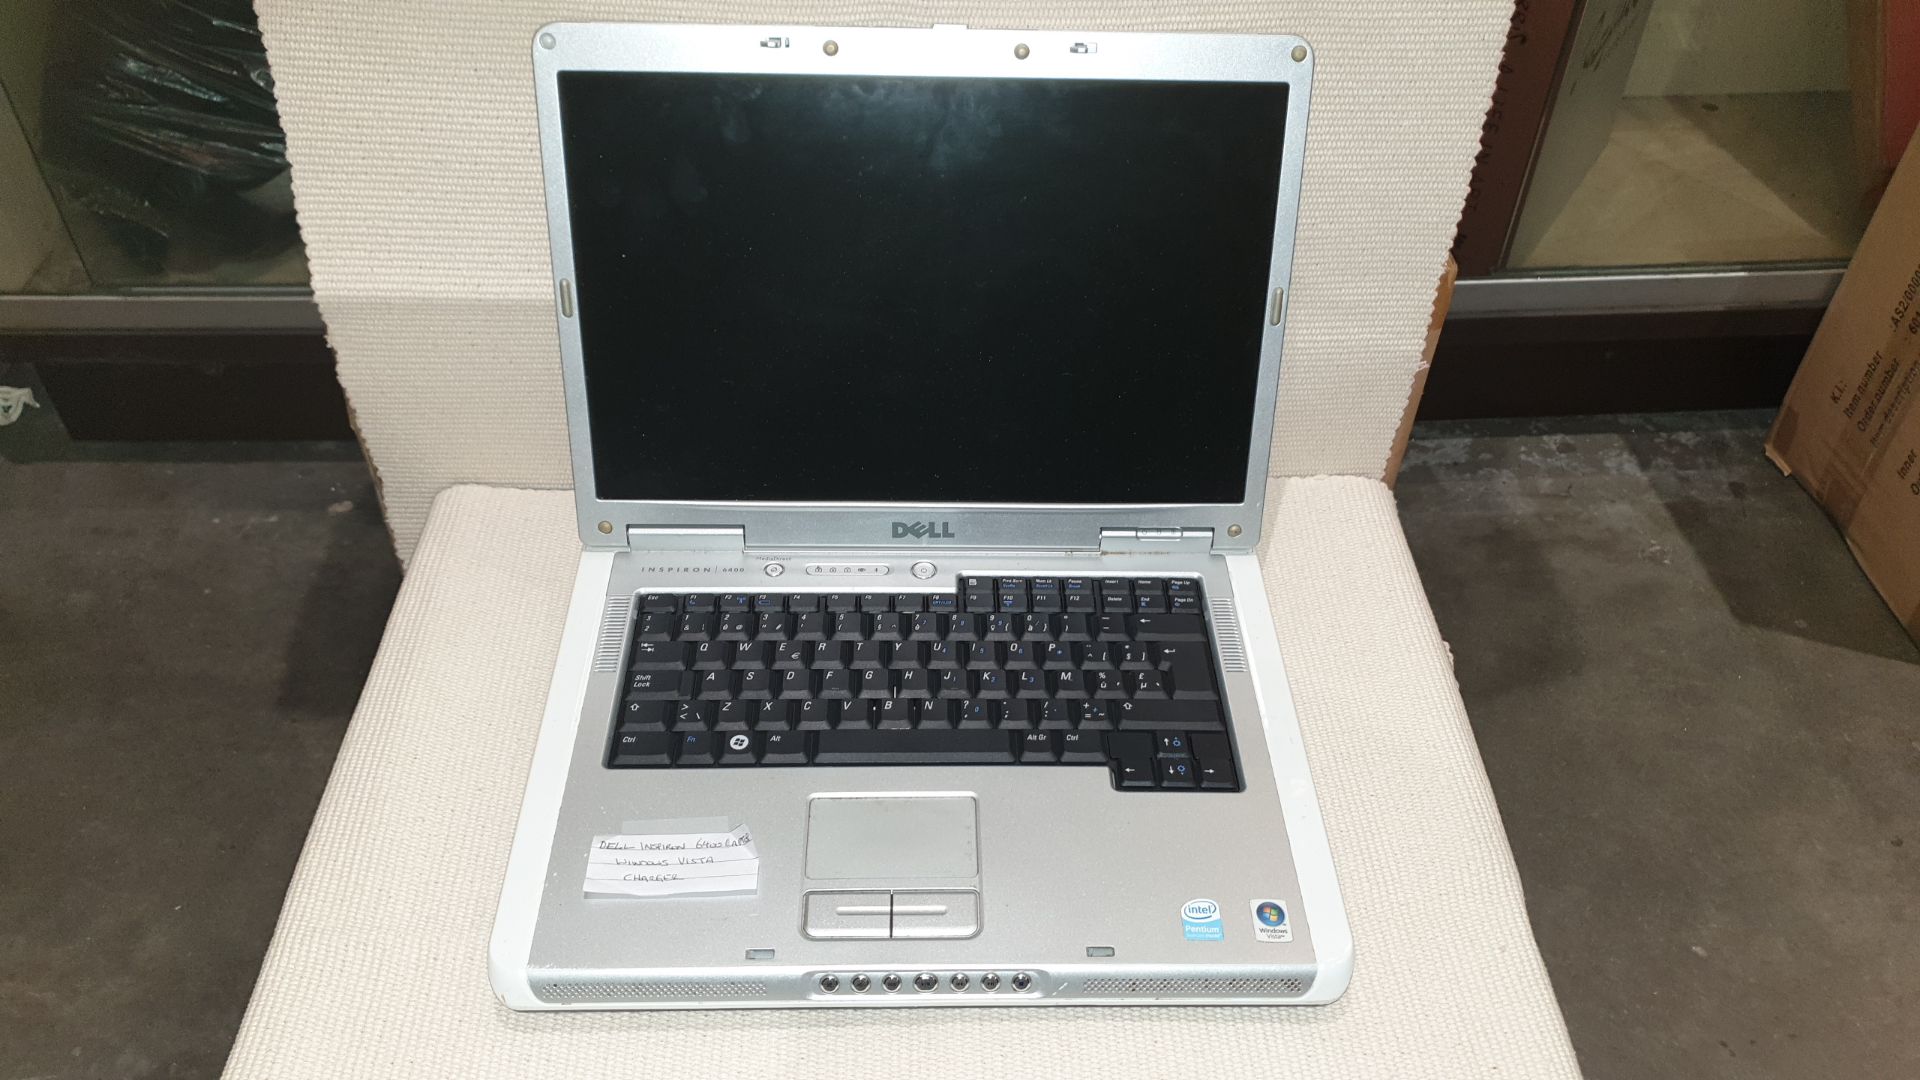 DELL INSPIRON 6400 LAPTOP WITH WINDOWS VISTA & CHARGER